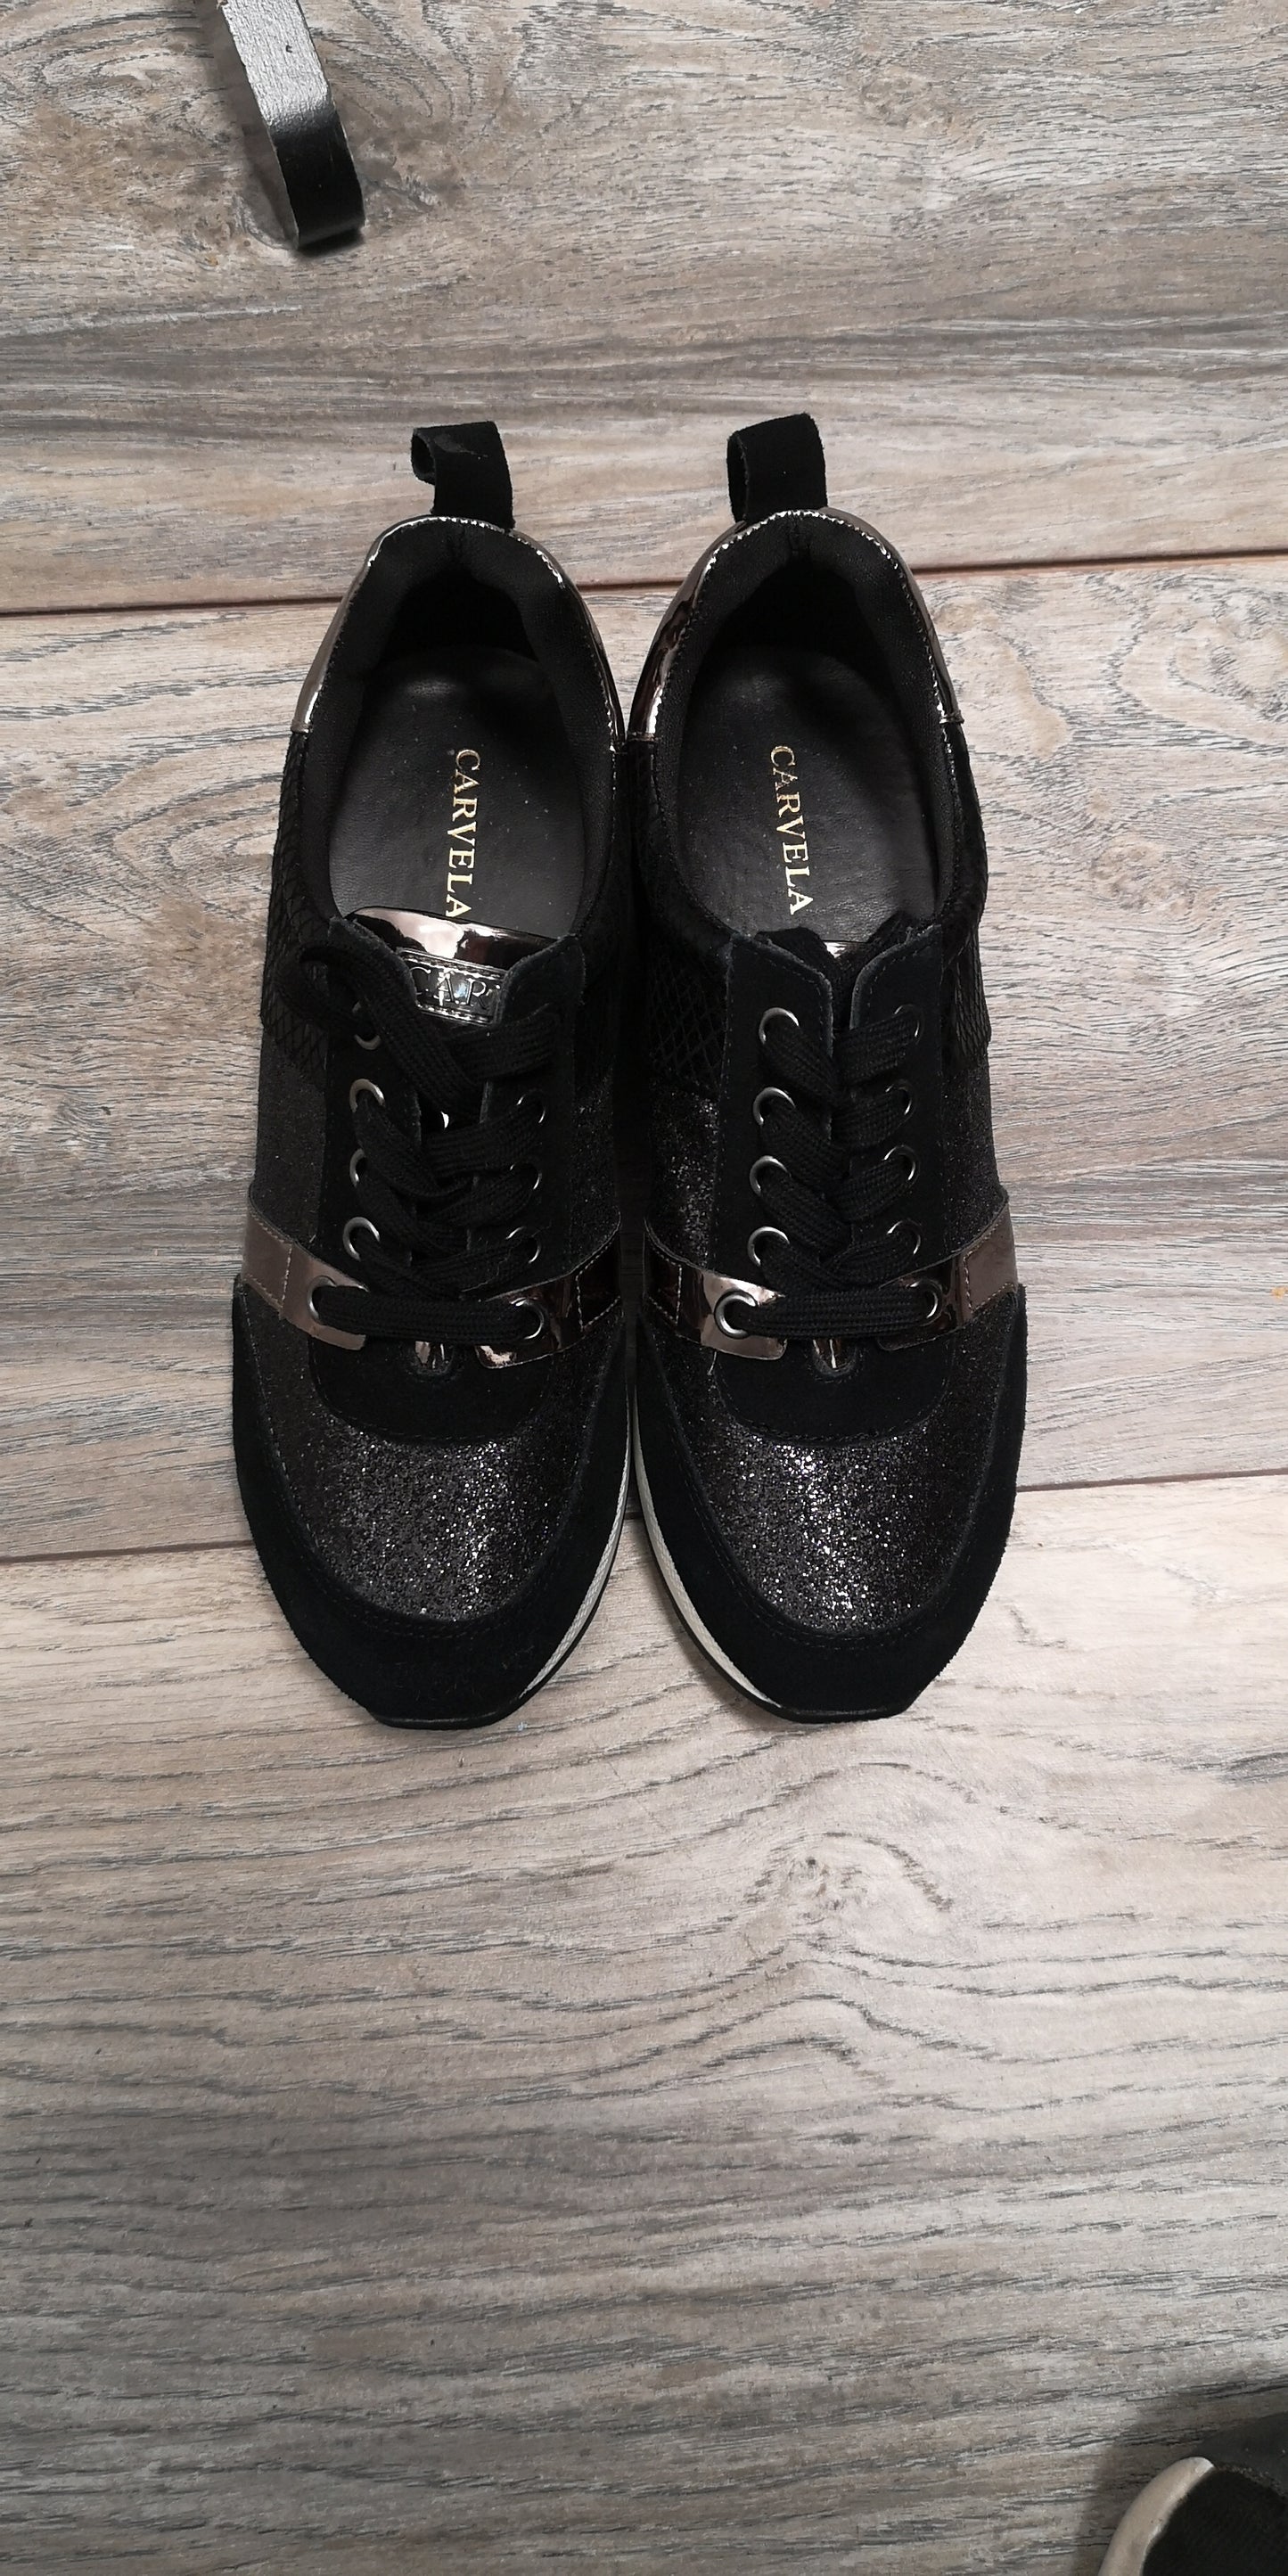 Carvela Justified Black Glitter Trainers Size 3